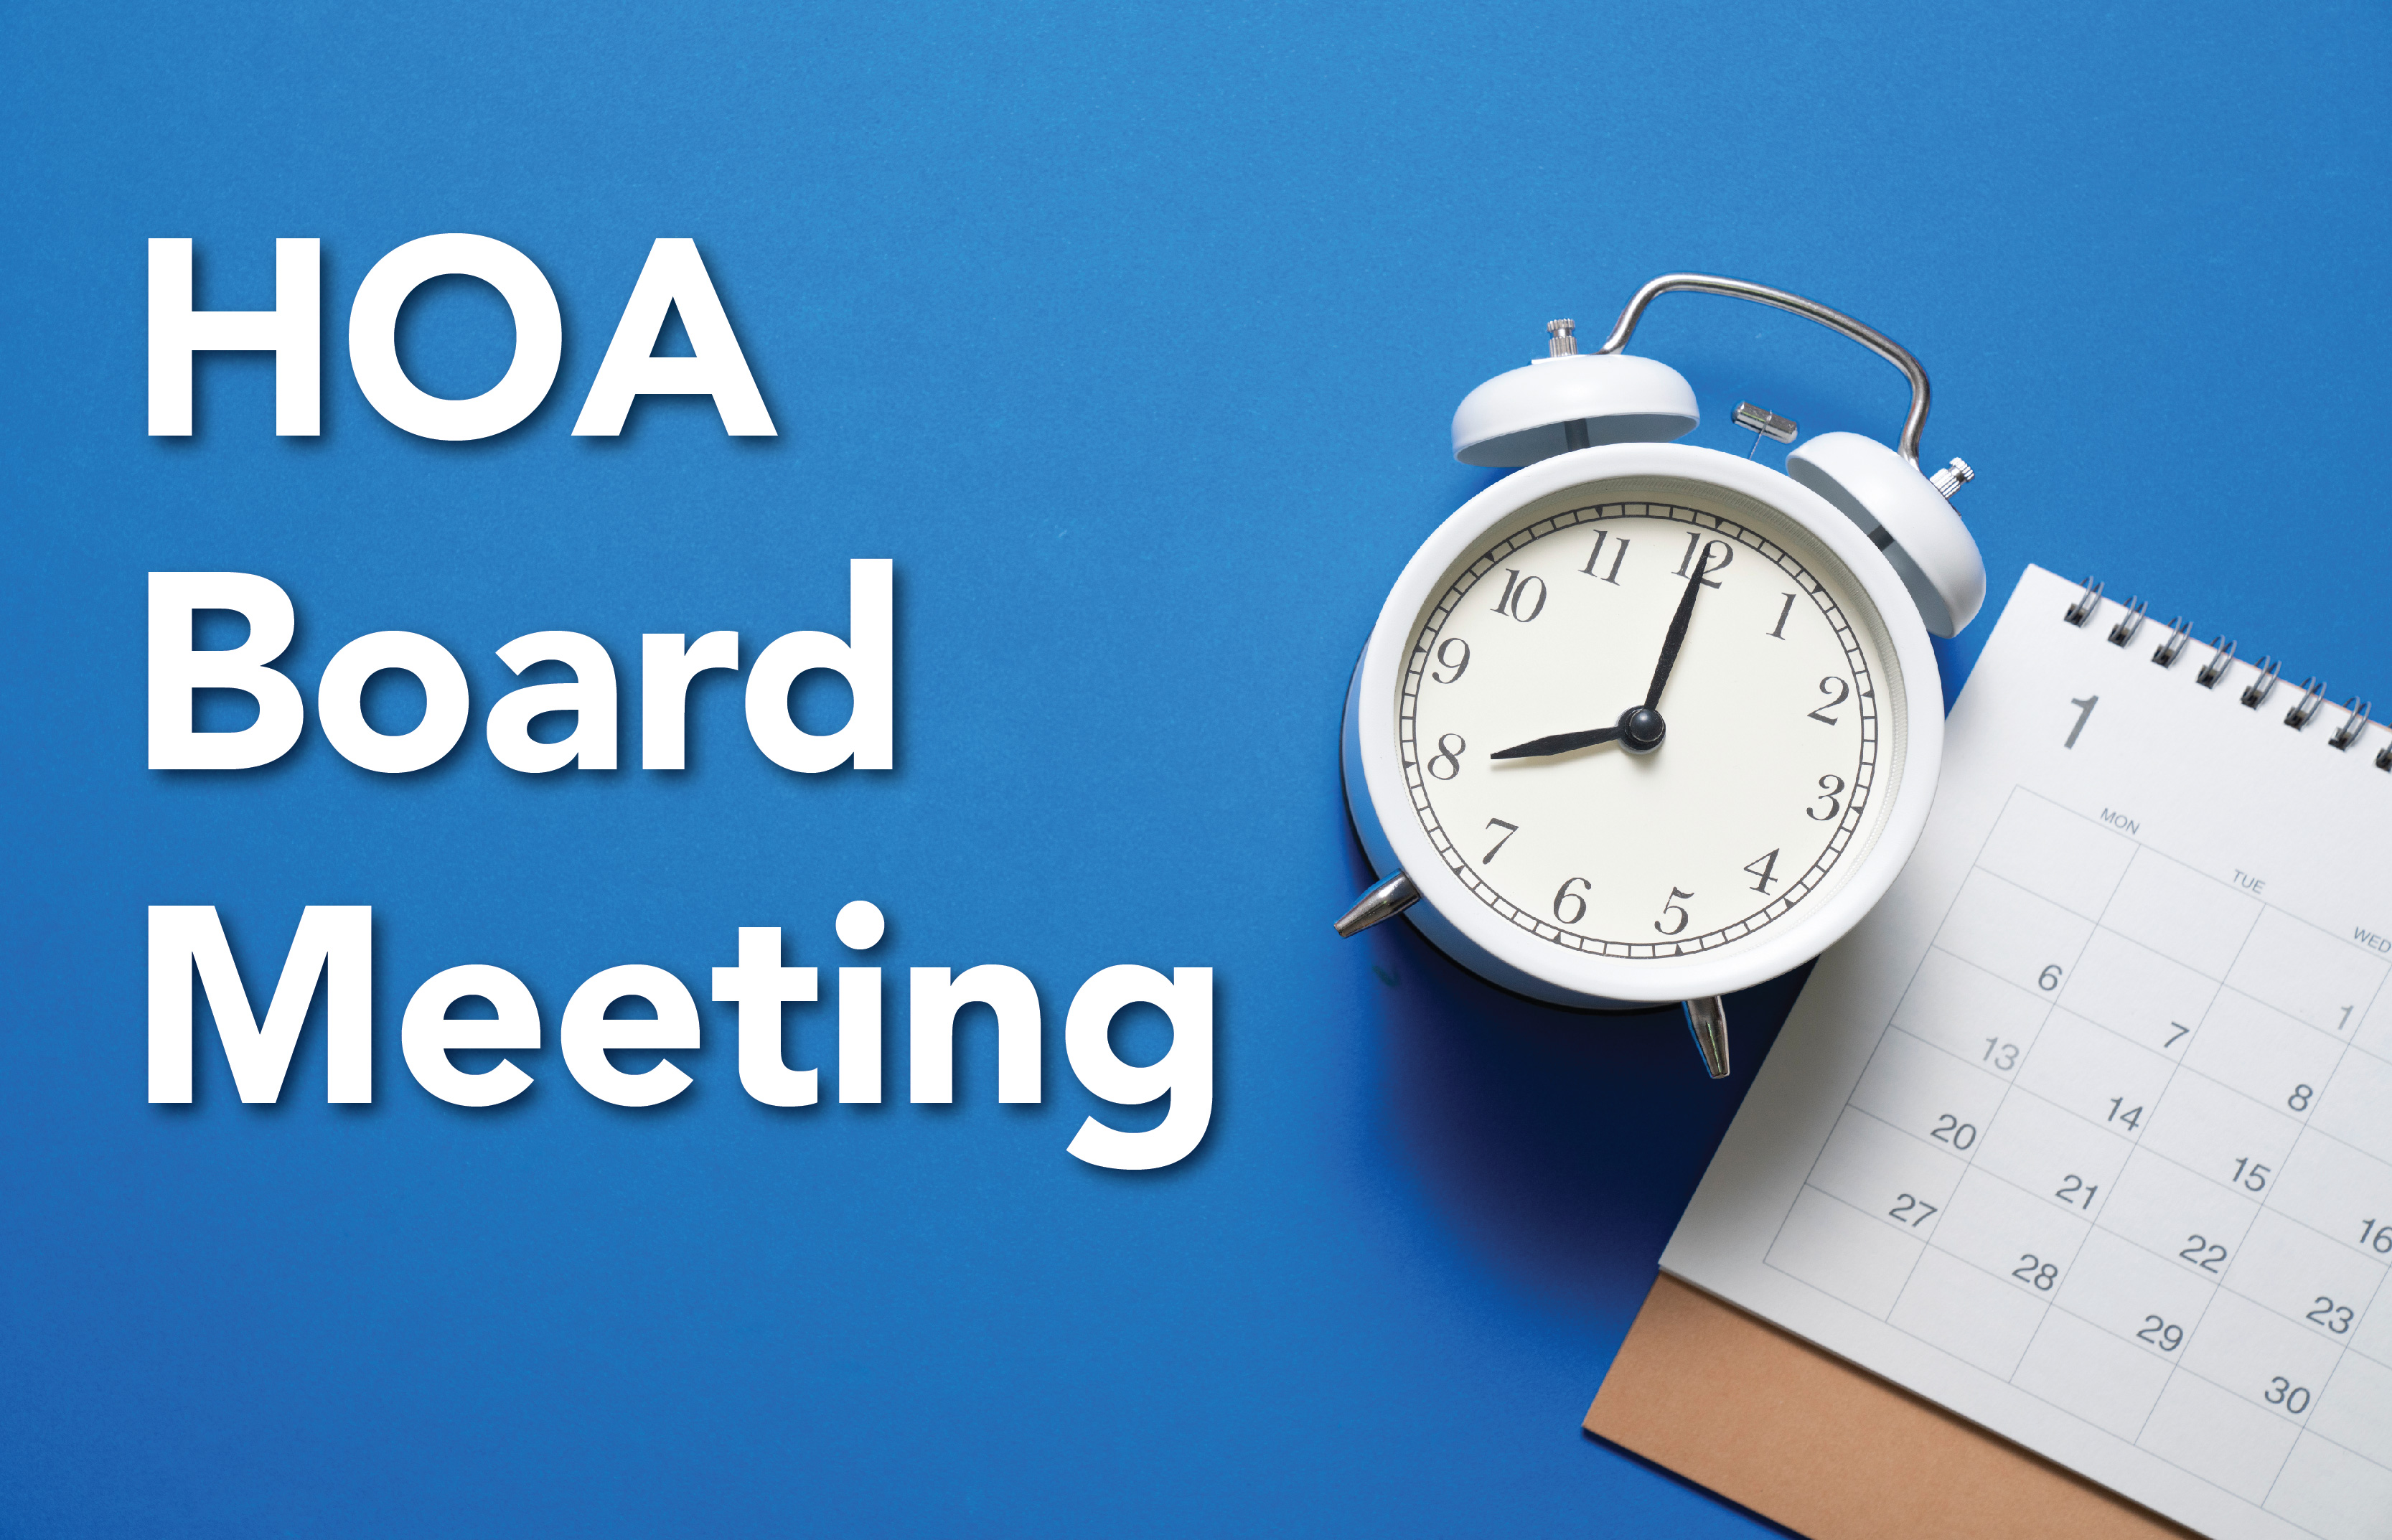 Copper Grove HOA Board Meeting Set for March 27